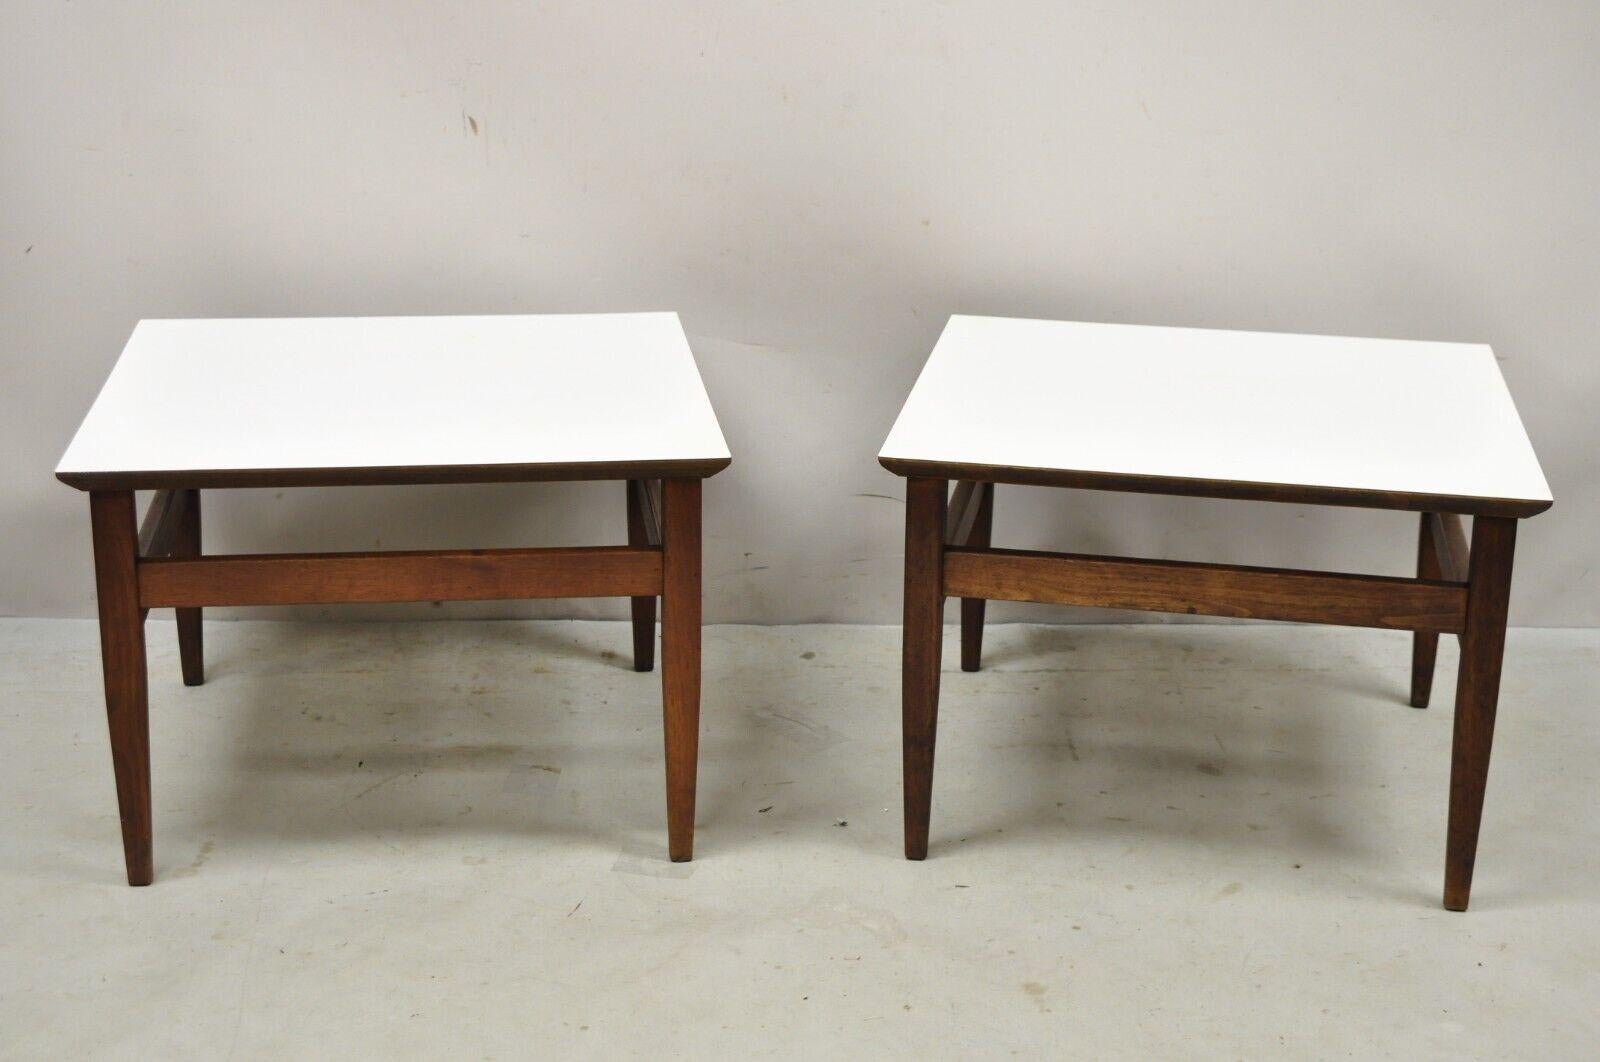 Vintage Mid Century Walnut Base Laminate Top Low Side Tables - a Pair. Item features a nice low form, white laminate tops, stretcher base, tapered legs, very nice vintage pair, clean modernist lines. Circa Mid 20th Century. Measurements: 14.5